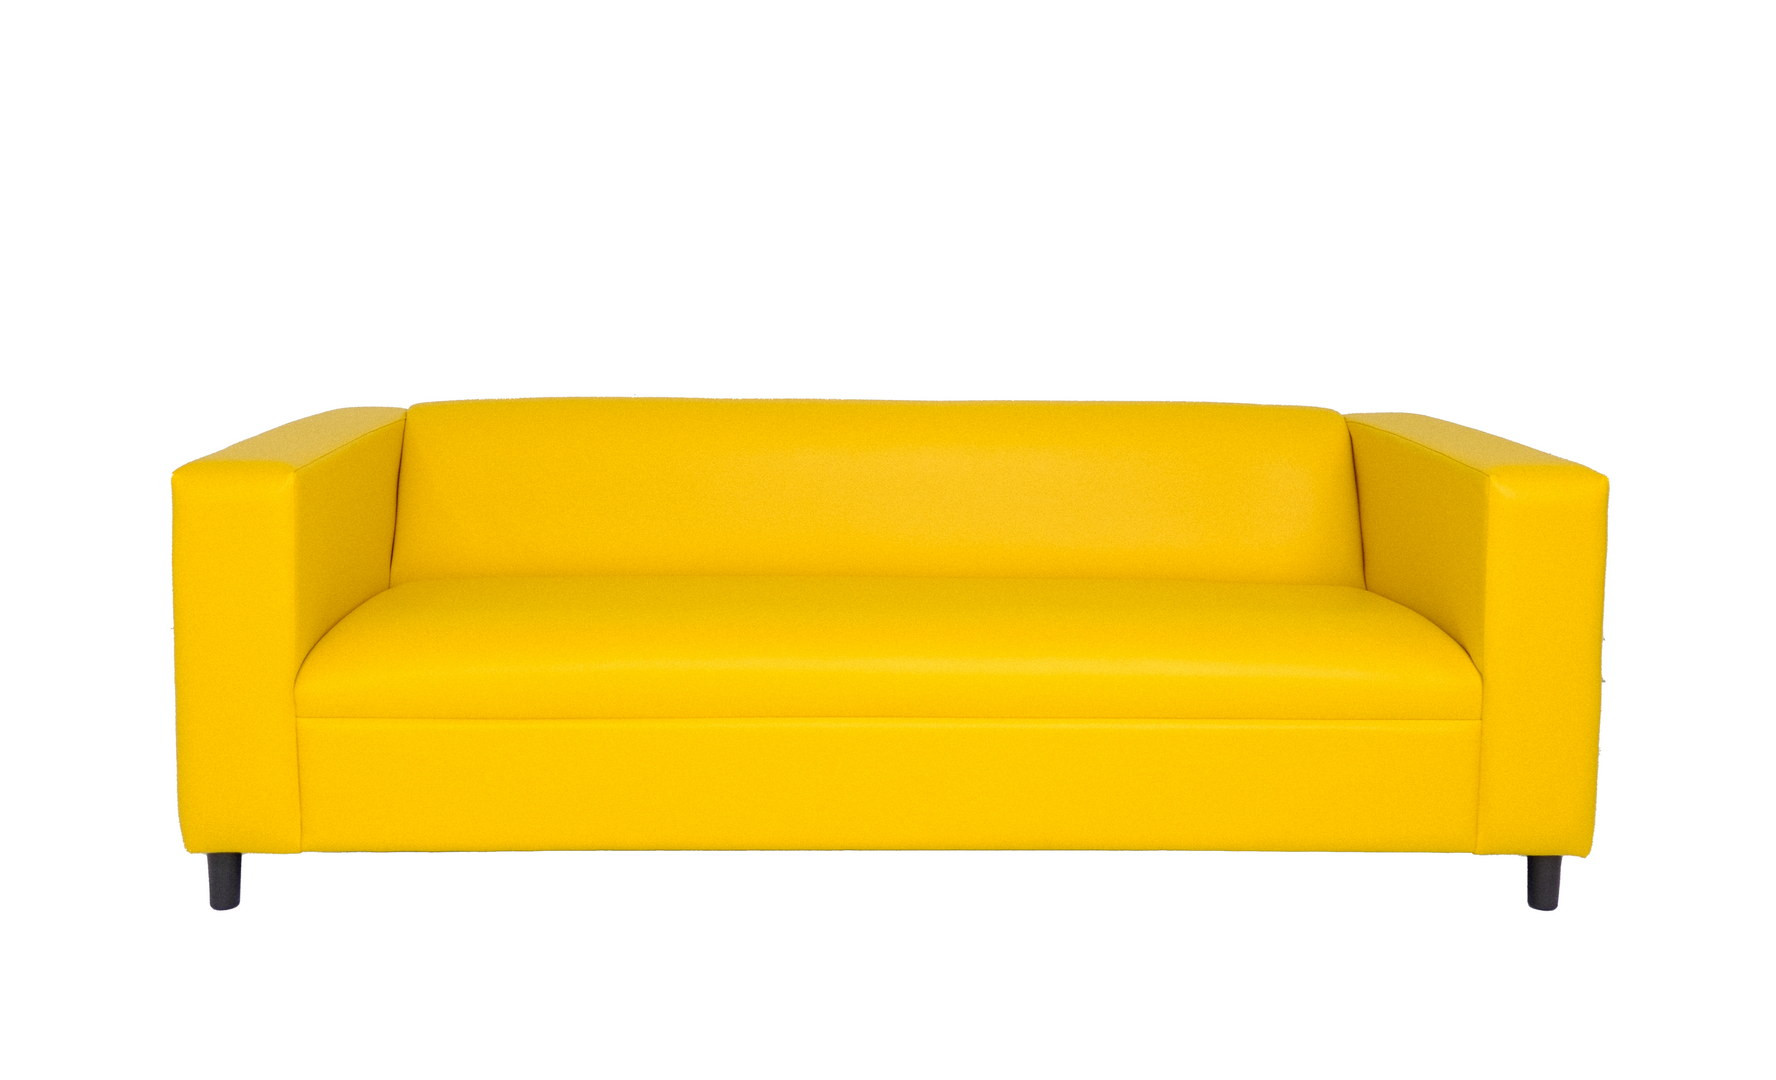 84" Yellow Faux Leather And Black Sofa-530489-1